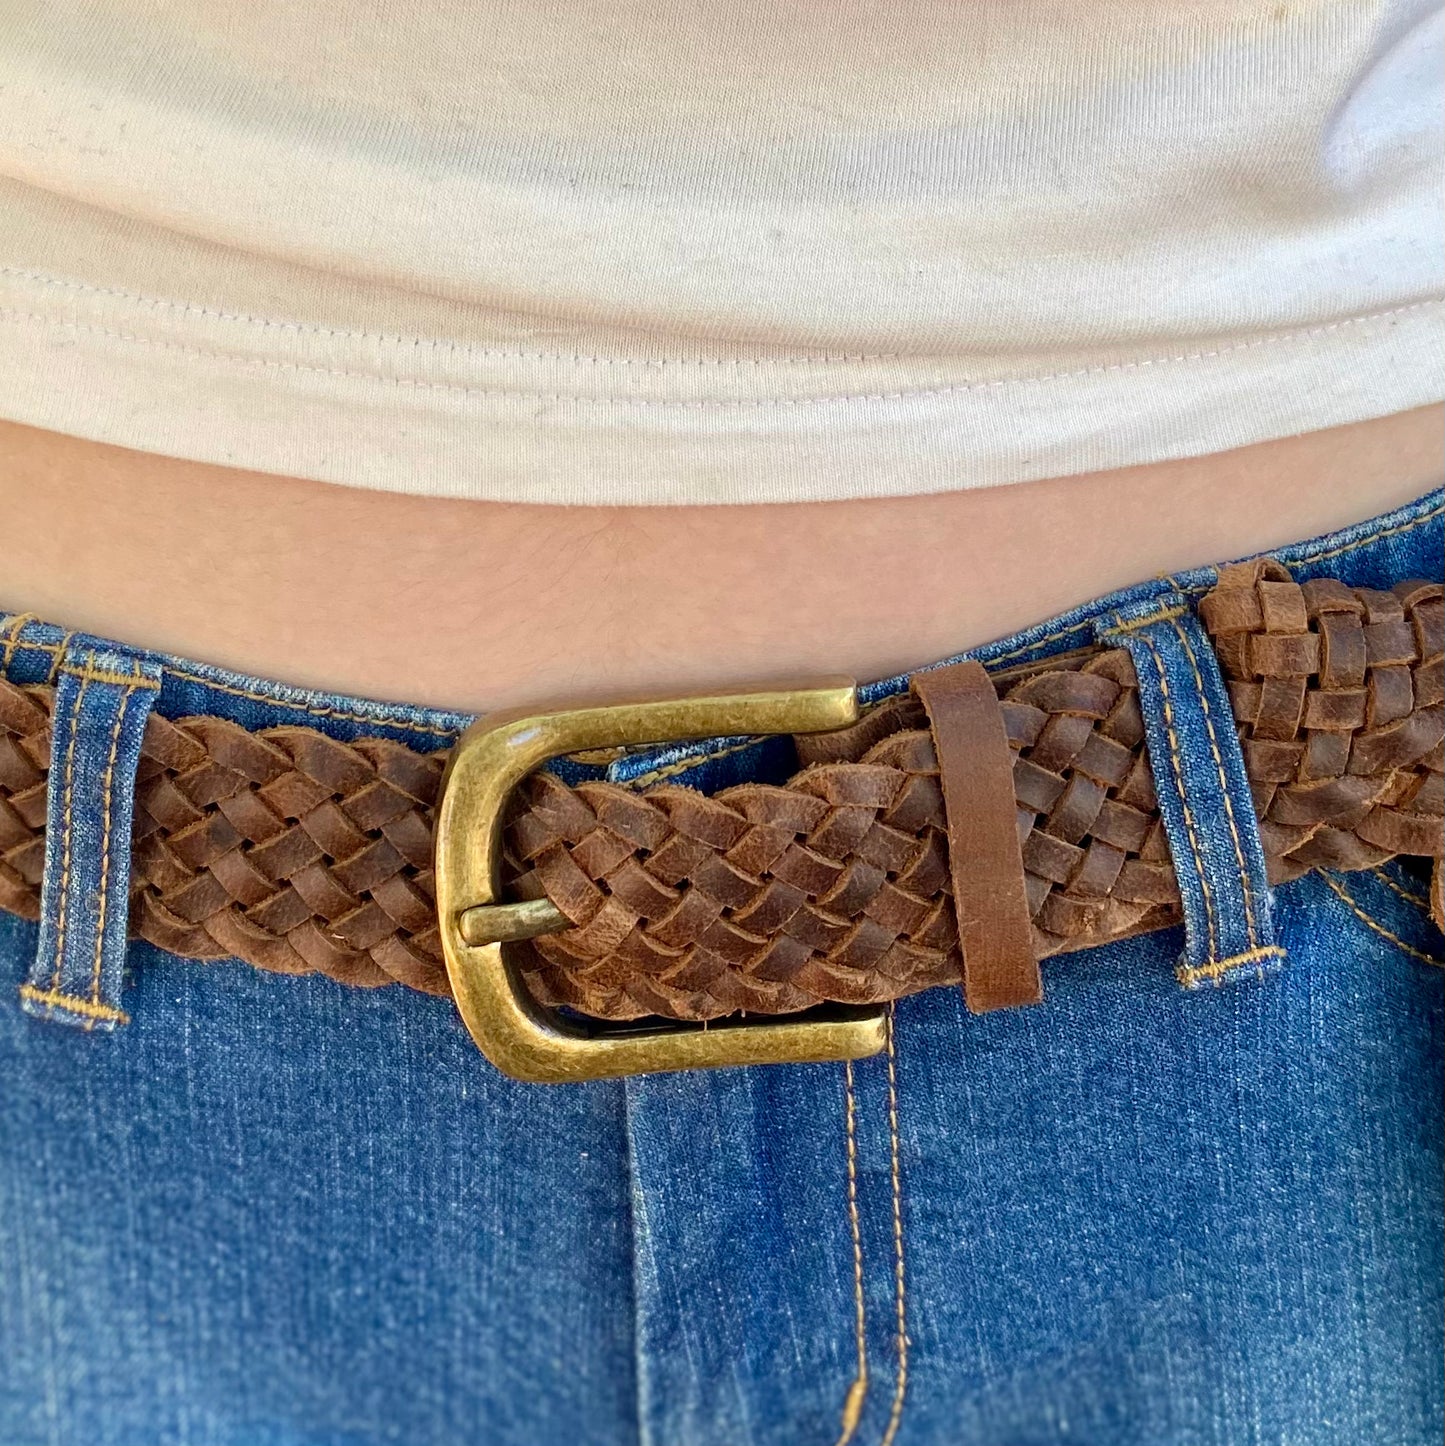 Plaited Leather Belts